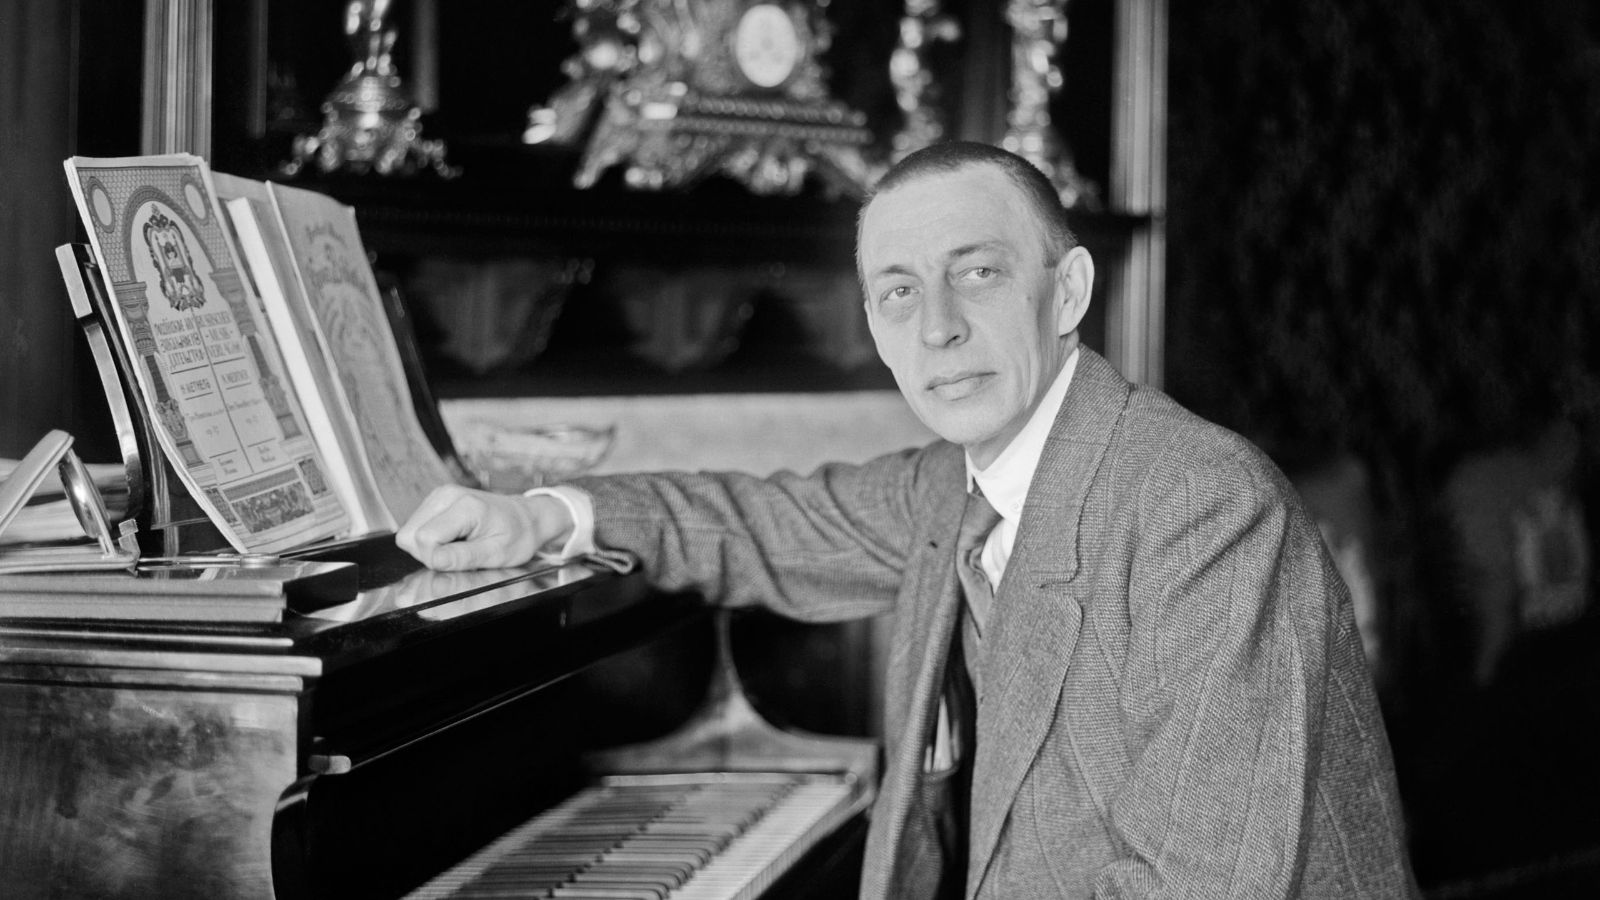 All night long—for an hour or so—with Rachmaninoff